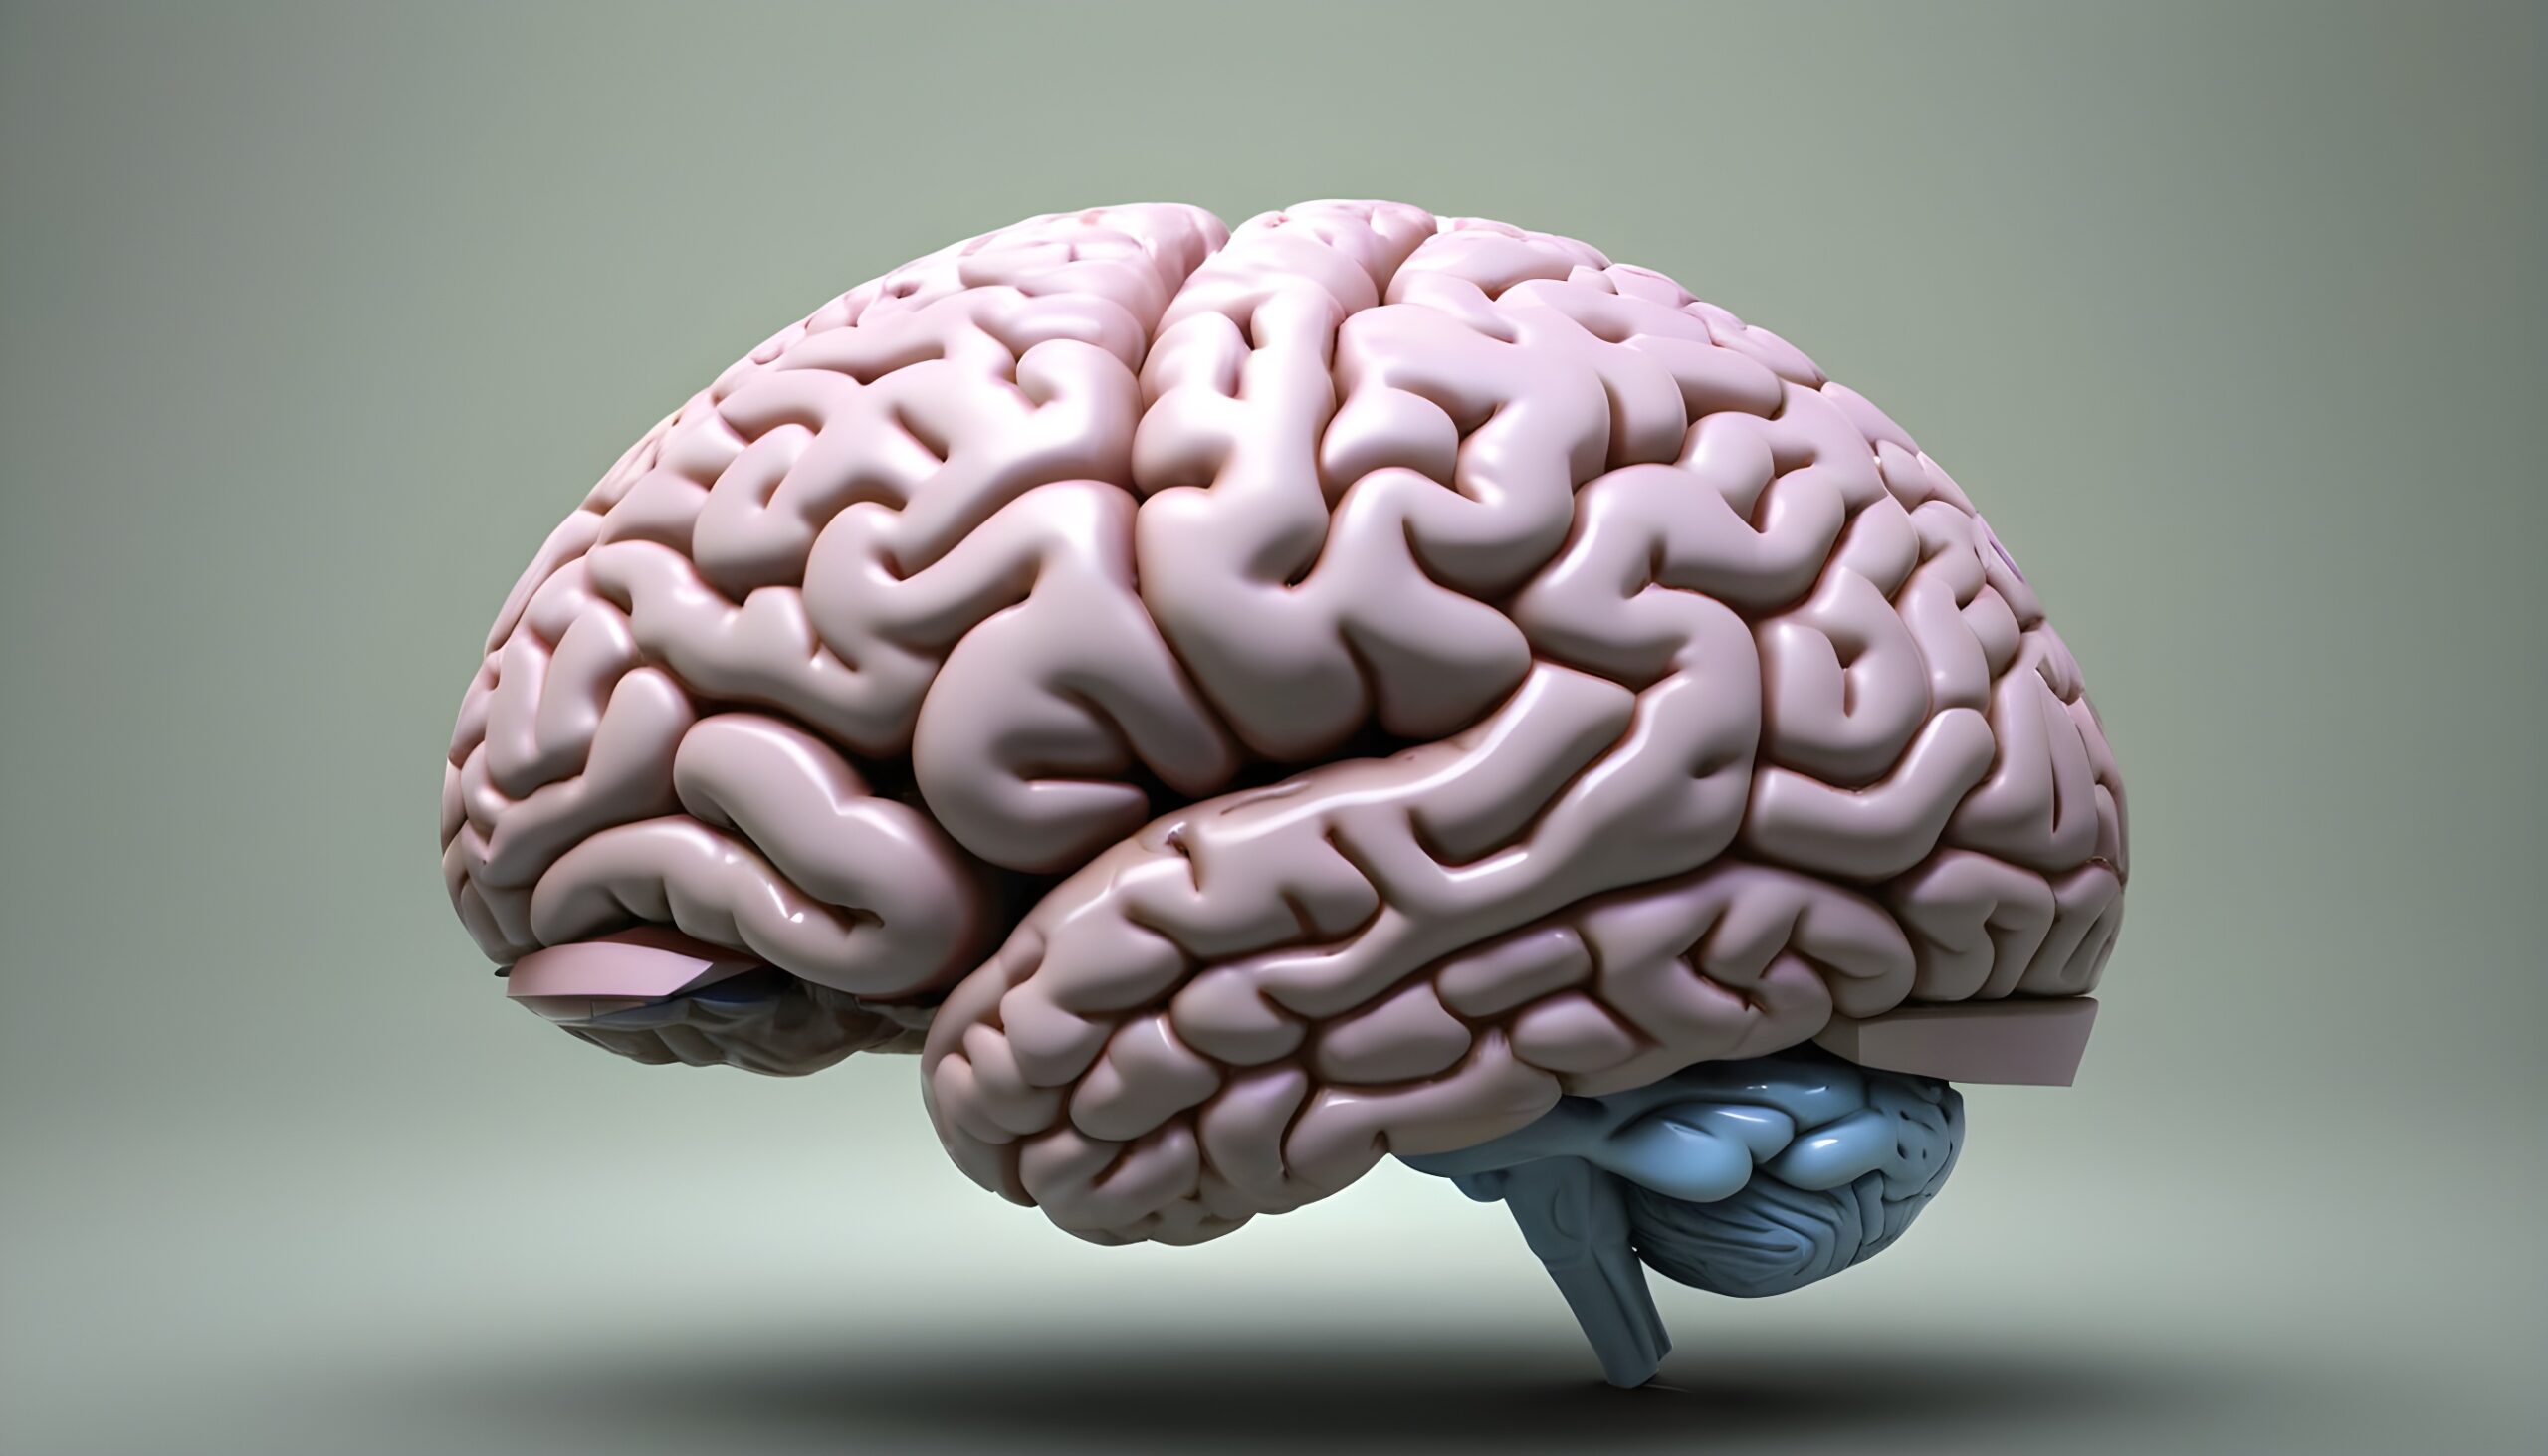 Image depicting a human brain, showcasing its intricate structure and neural connections.